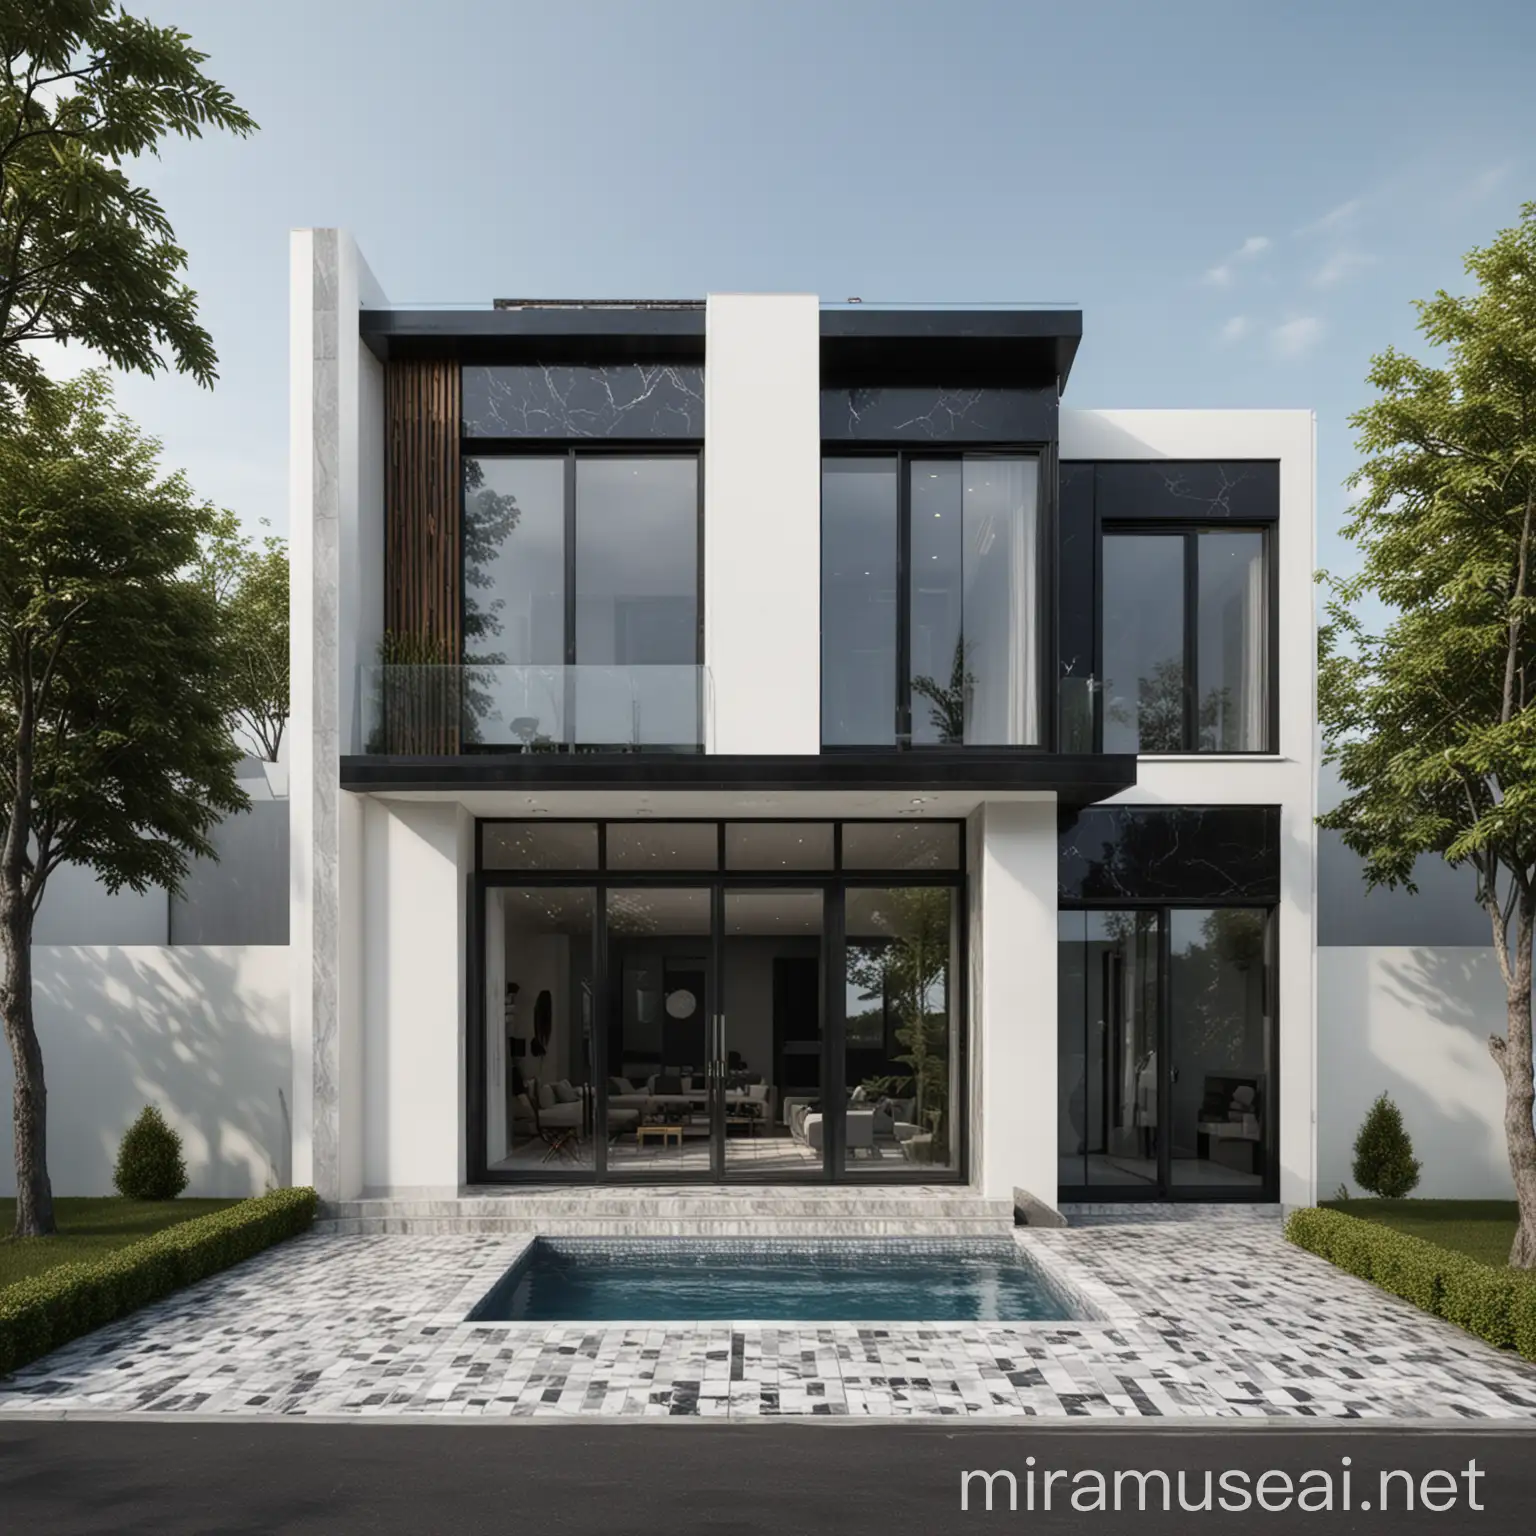 Create a 3D design of a two-story modern villa with minimalist style. using as the facade : white and black marble and wood, for windows use black aluminum with glass and 2 meters width by 2.5 meters height, for doors use black steel with cladding. for floor use porcelain tiles. do not add swimming pool. add car garage